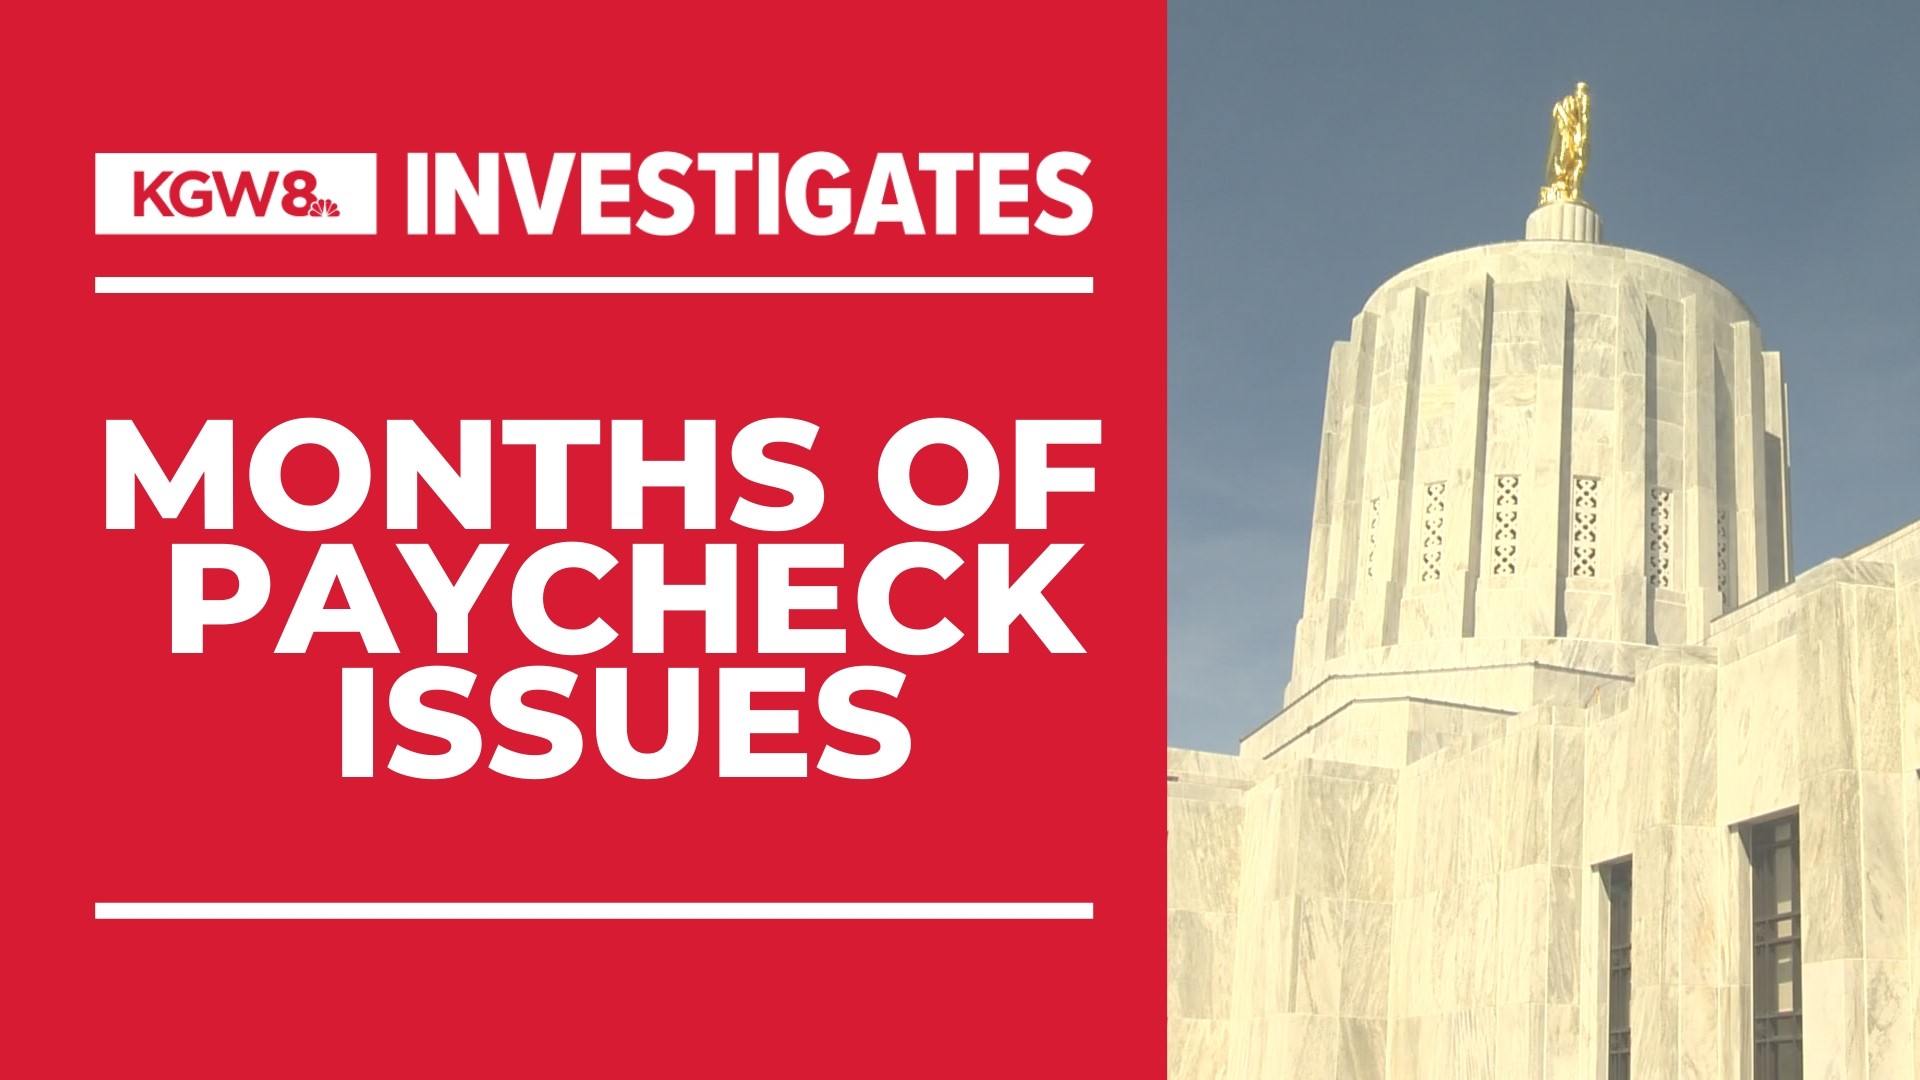 The payroll problems have sparked lawsuits and complaints from frustrated workers. "We rely on our paychecks just like everyone else," said one state worker.